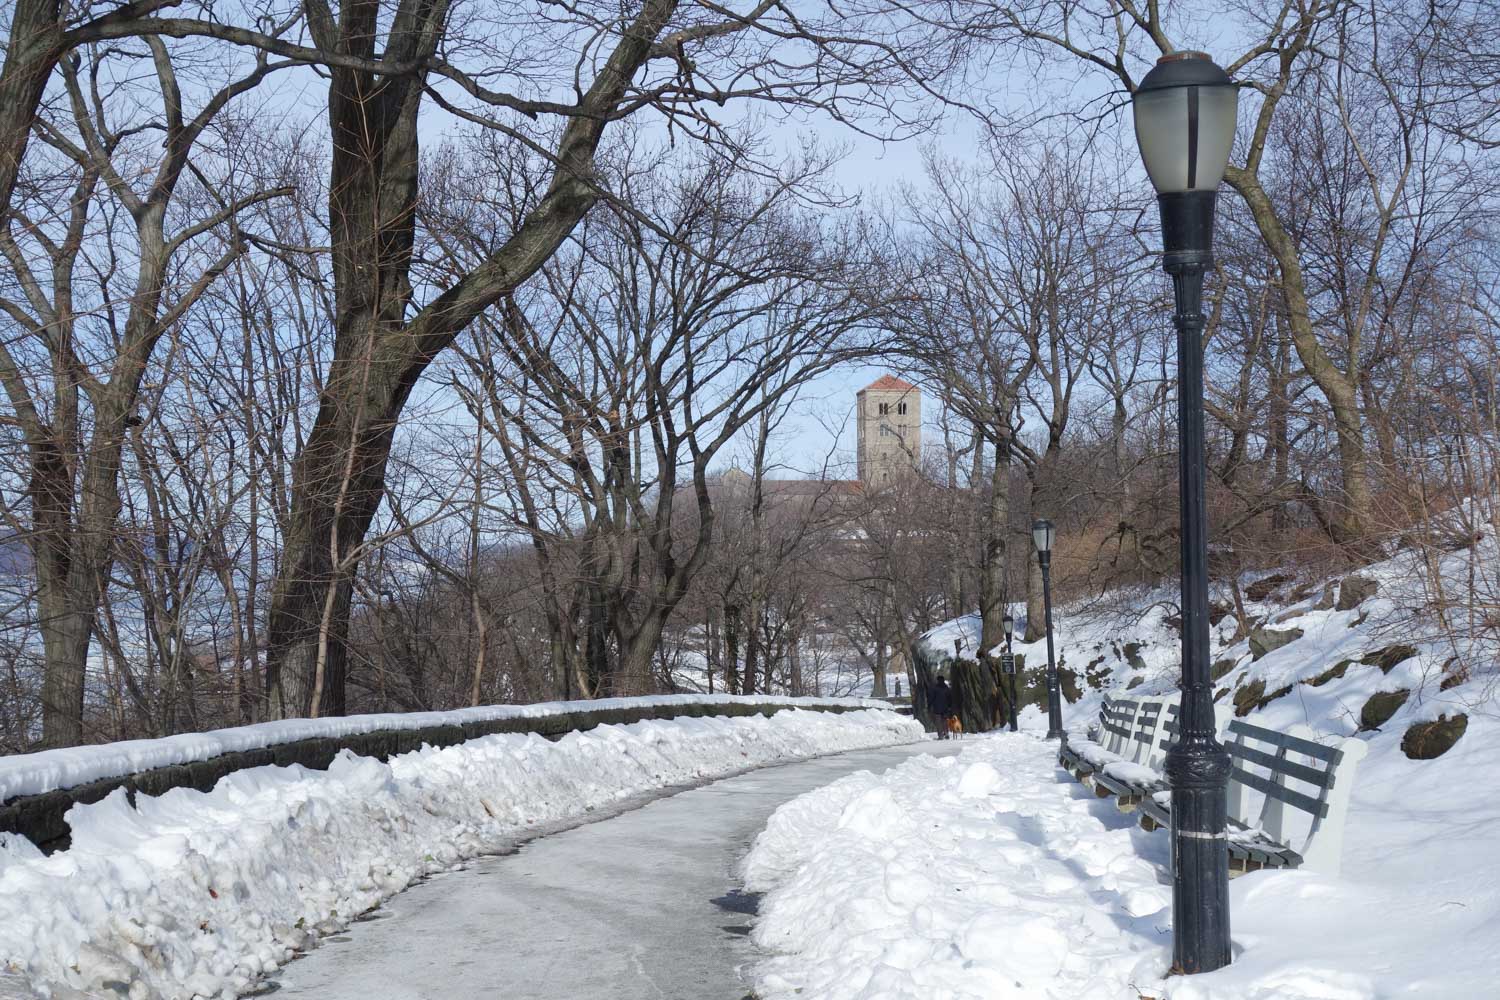 Snowy Fort Tryon Park, New York City in December